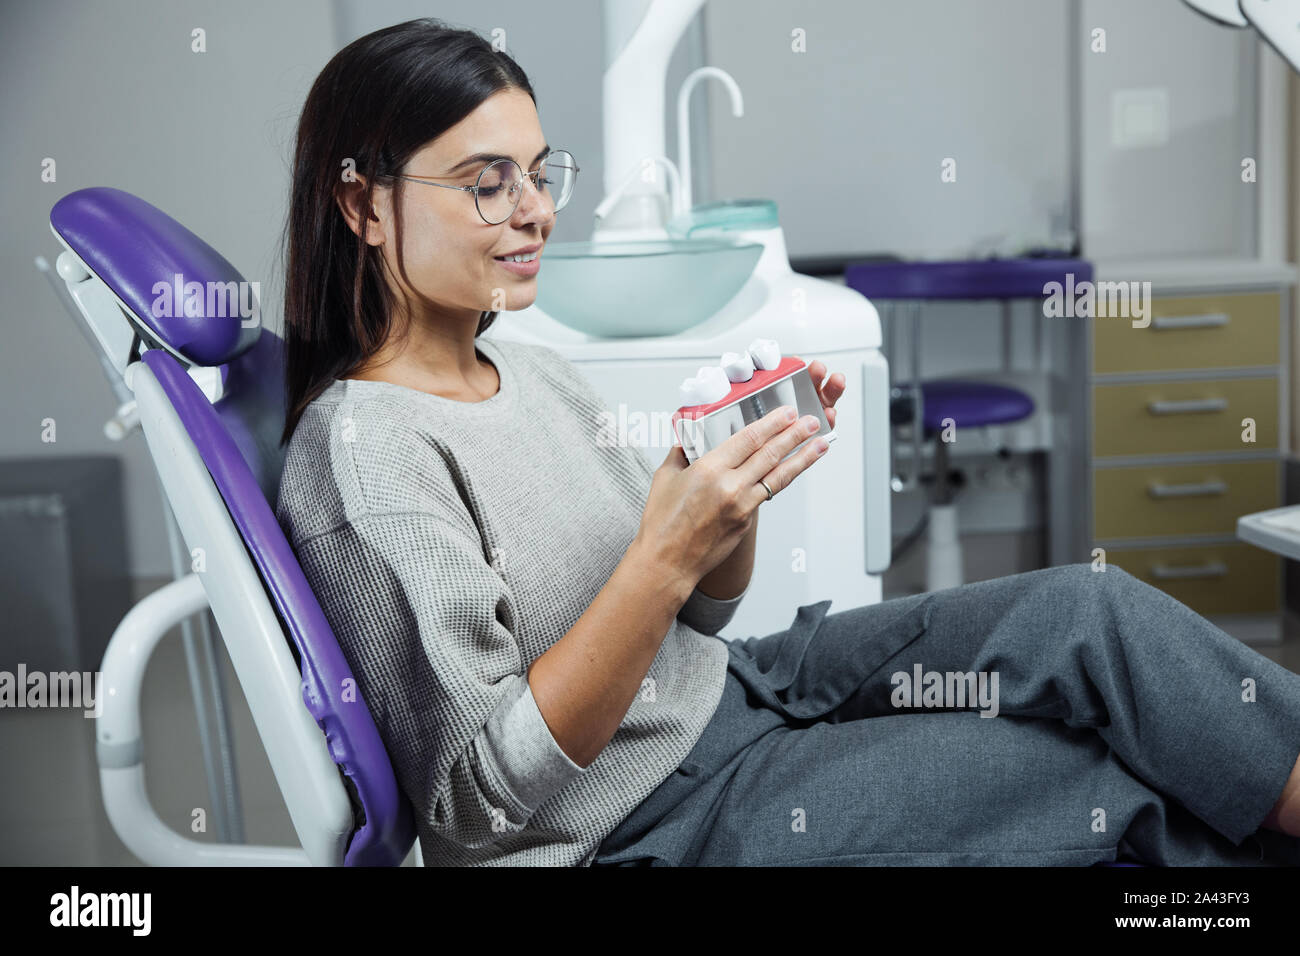 Young female patient sitting on chair in dental office. Preparing for dental exam. Looking at camera Stock Photo